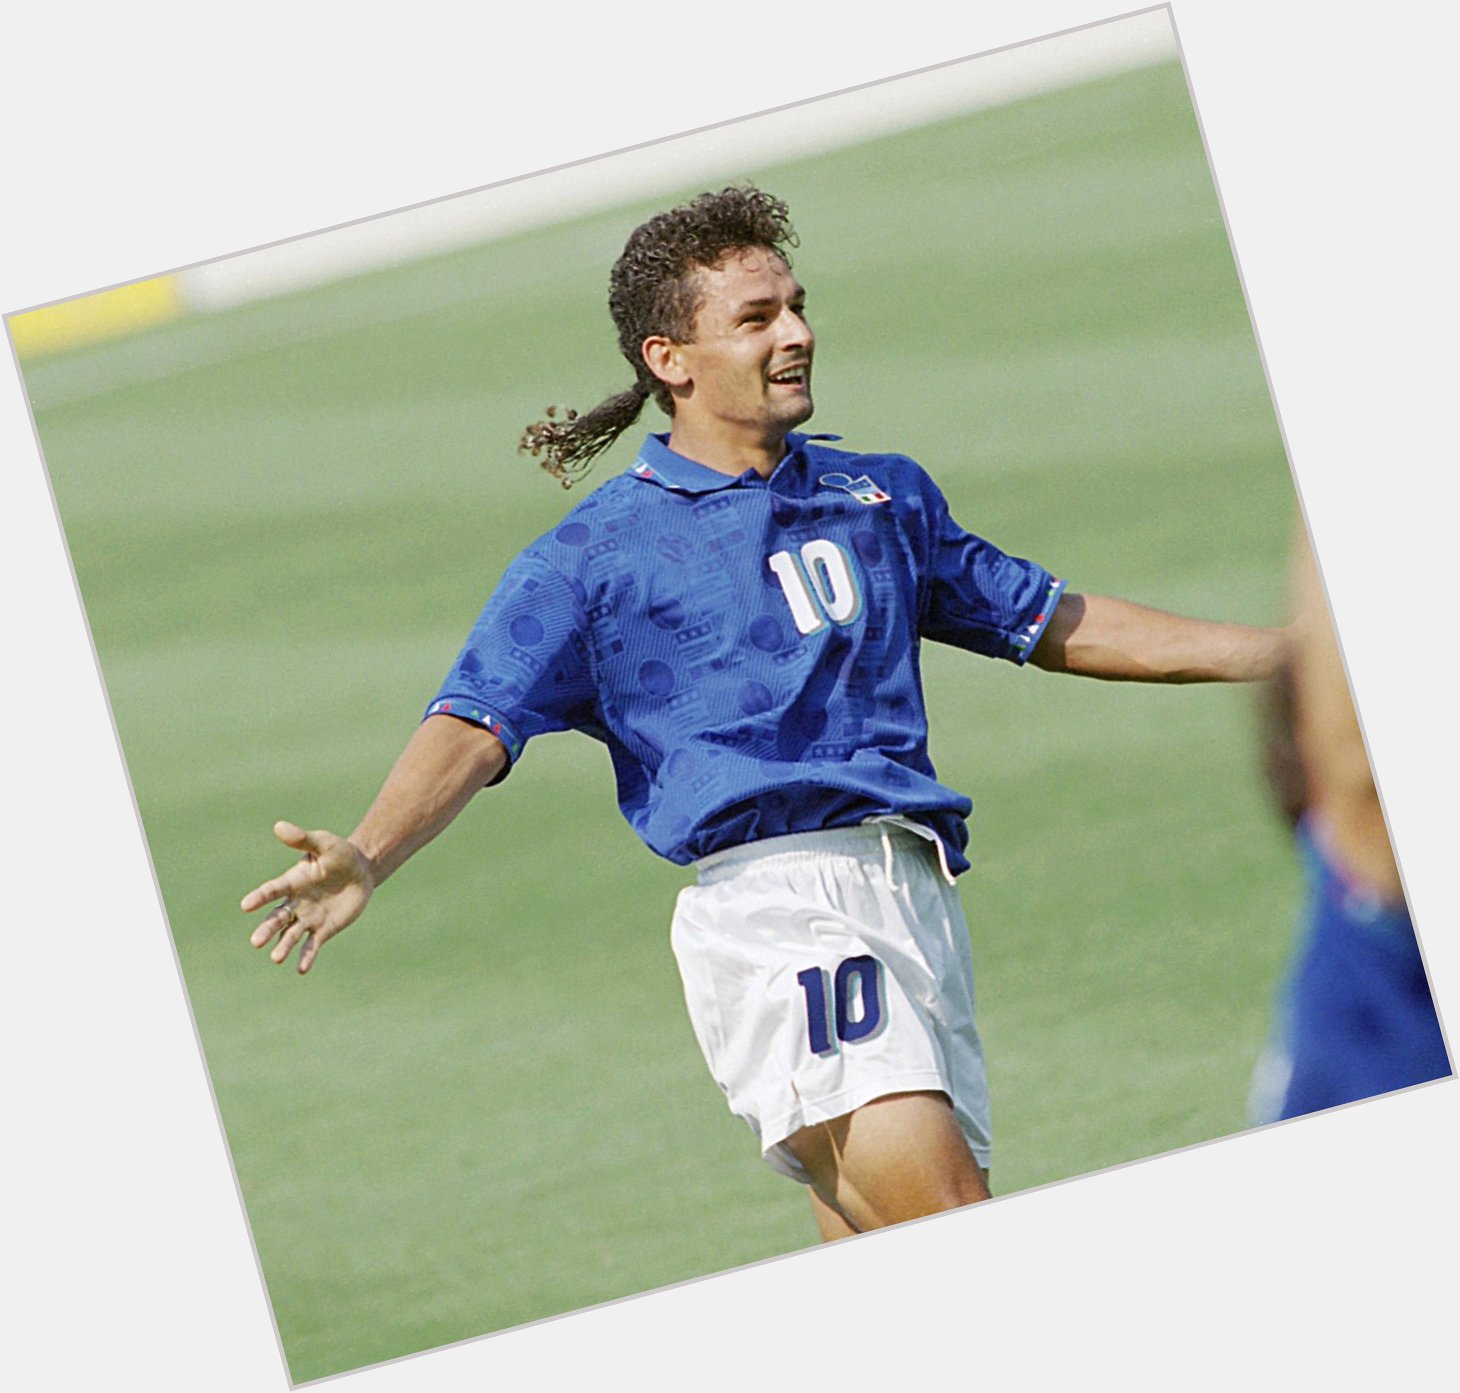  Happy Birthday Roberto Baggio! 52 ys today

He is considered one of the best Italian football player ever. 